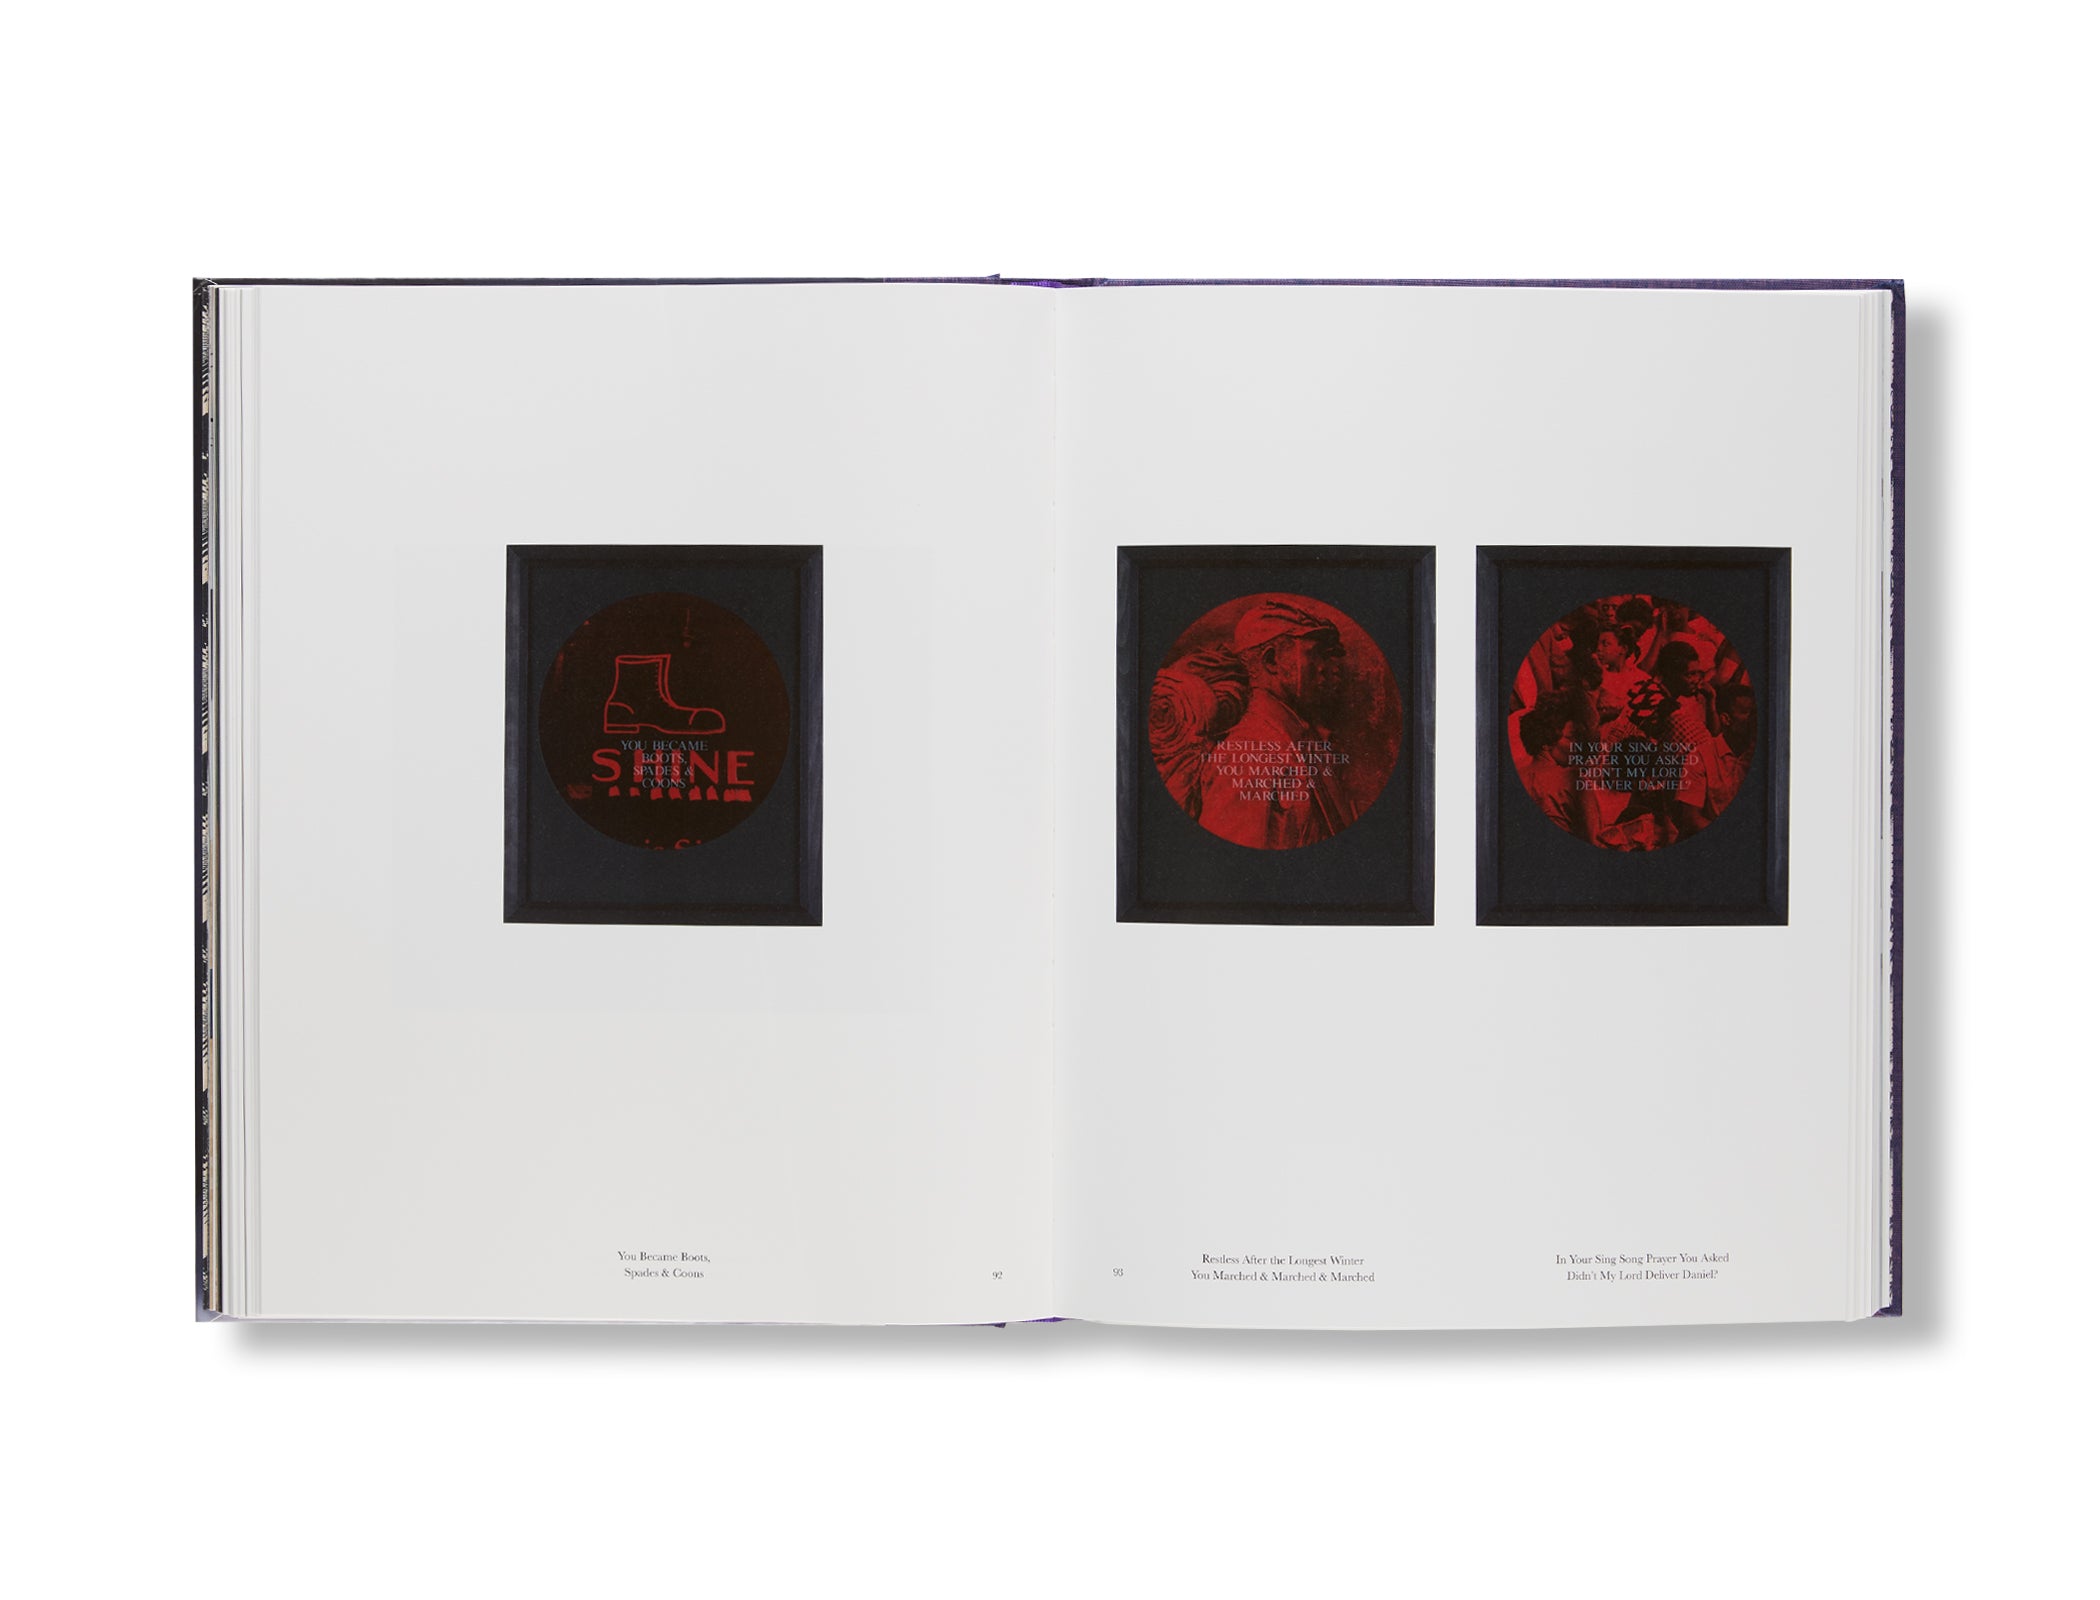 A GREAT TURN IN THE POSSIBLE by Carrie Mae Weems